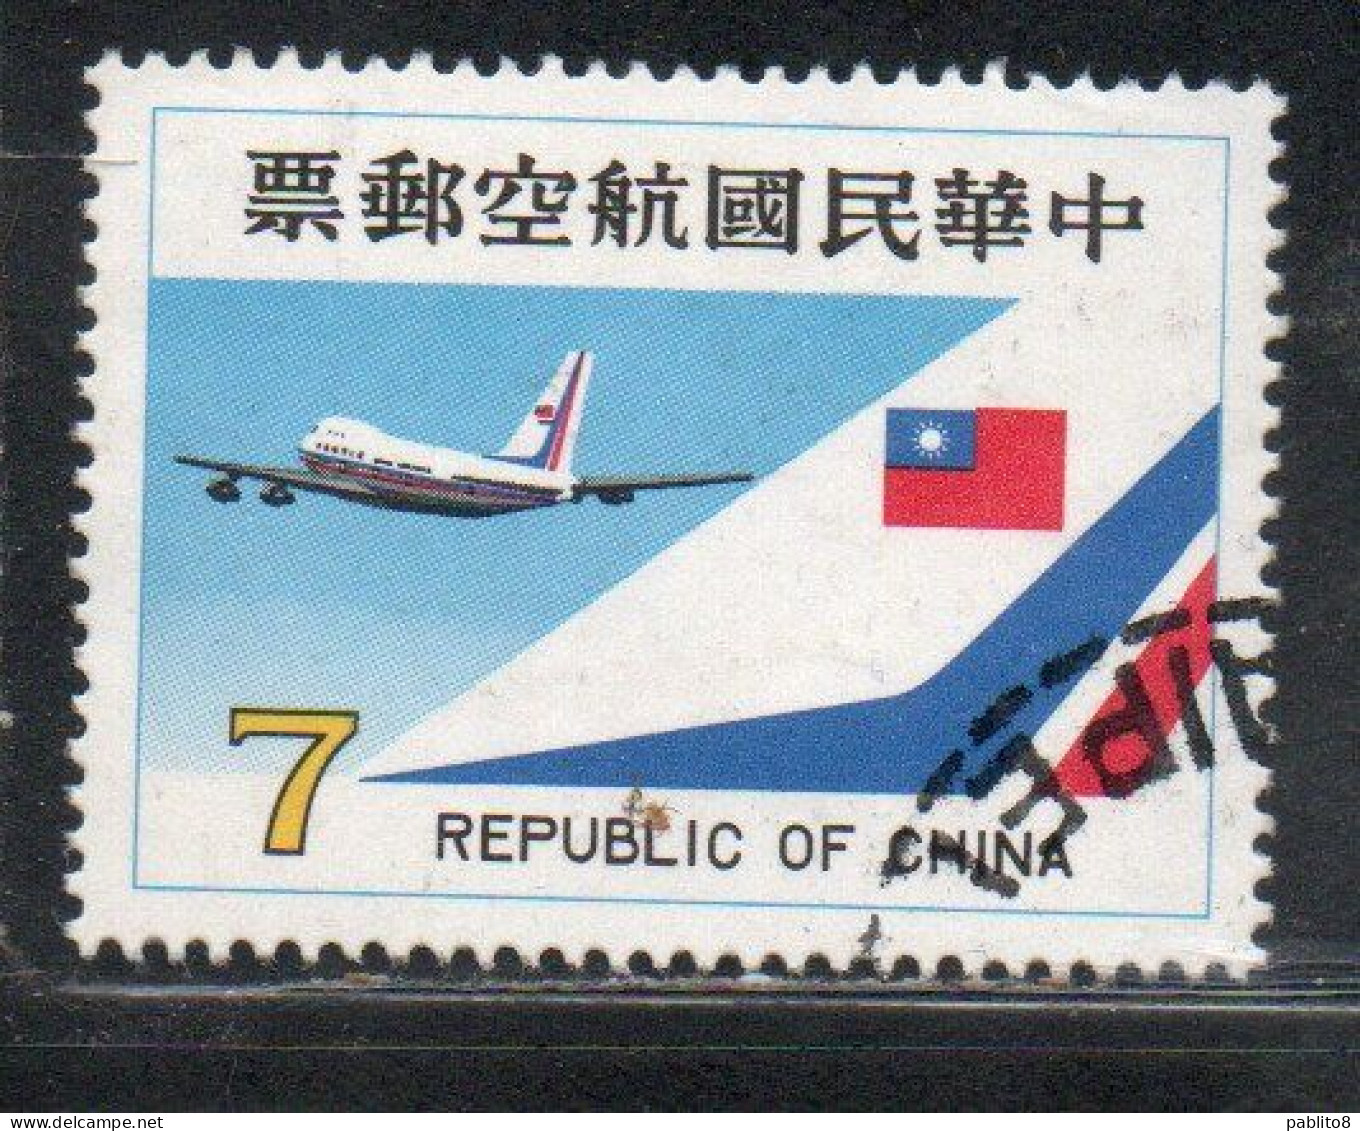 CHINA REPUBLIC CINA TAIWAN FORMOSA 1980 AIR POST MAIL AIRMAIL CHINA AIRLINES JET 7$ USED USATO OBLITERE' - Luftpost